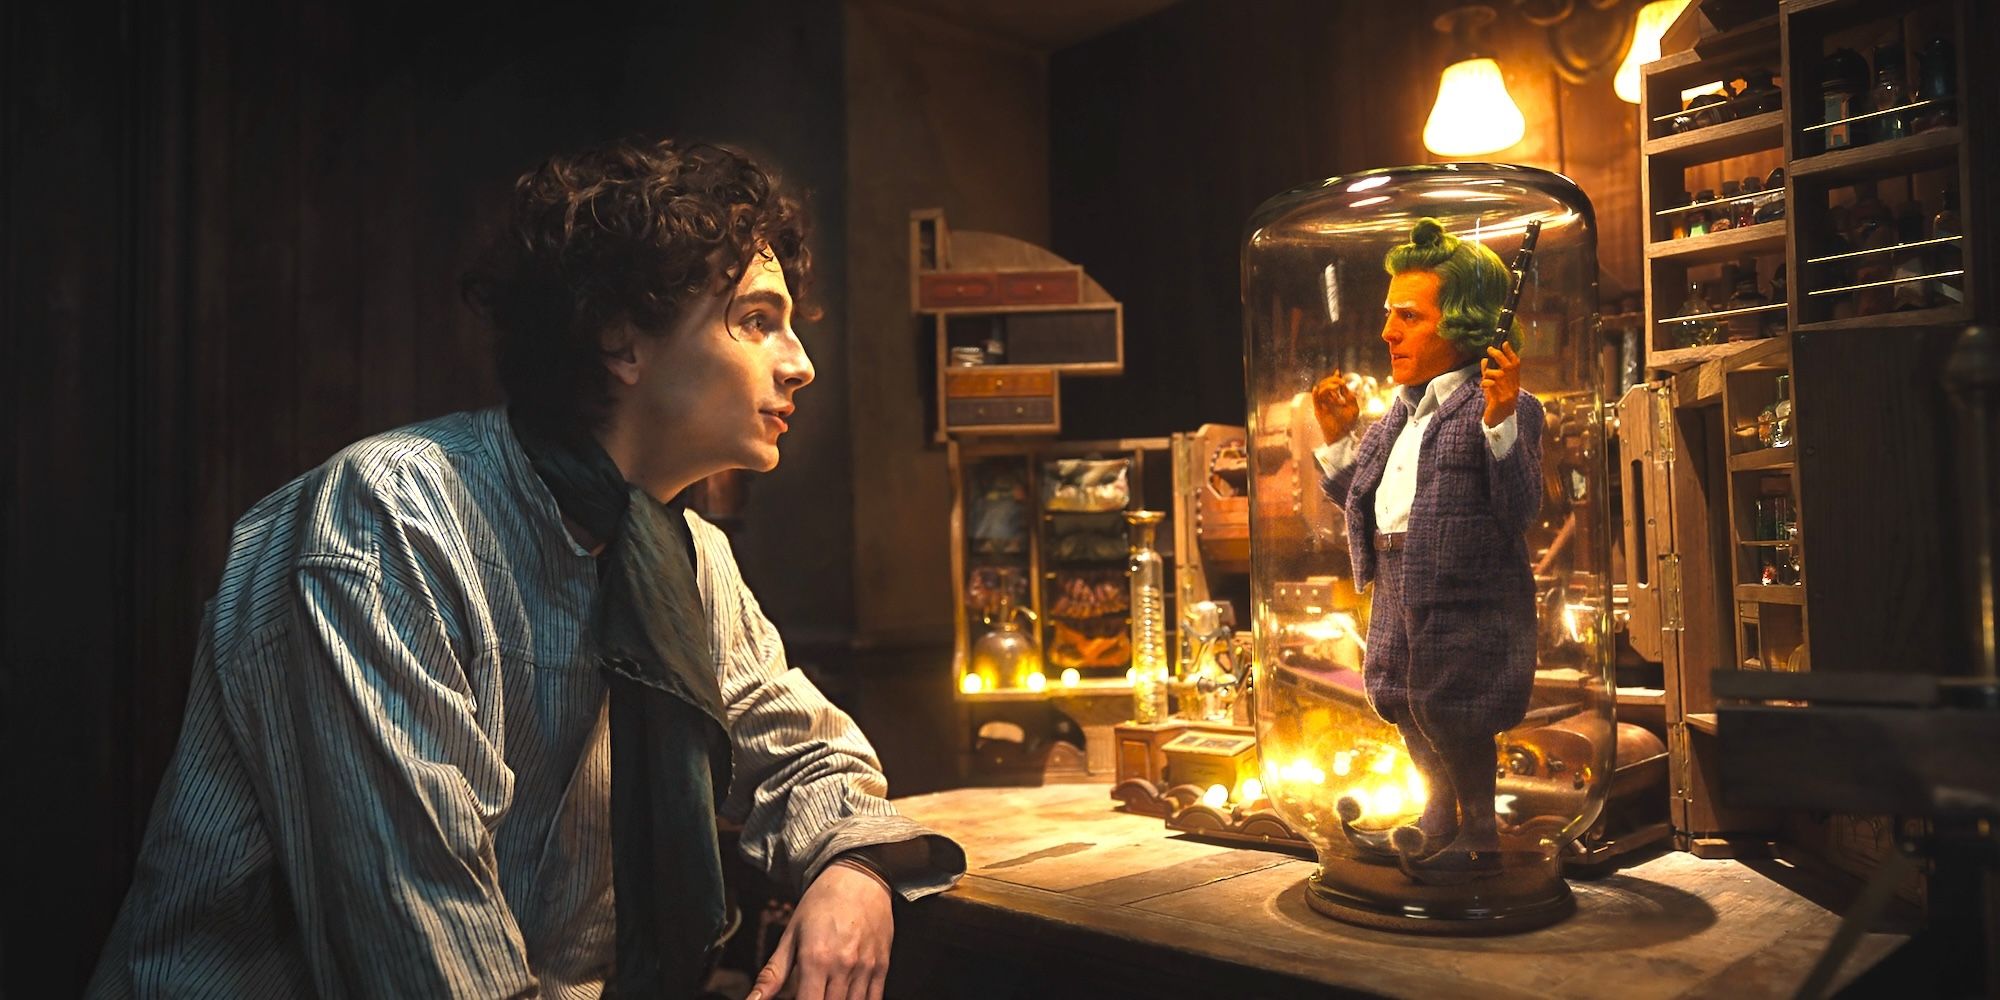 Willy Wonka (Timothée Chalamet) looking curiously at an Oompa Loompa (Hugh Grant) in a glass enclosure in Wonka.